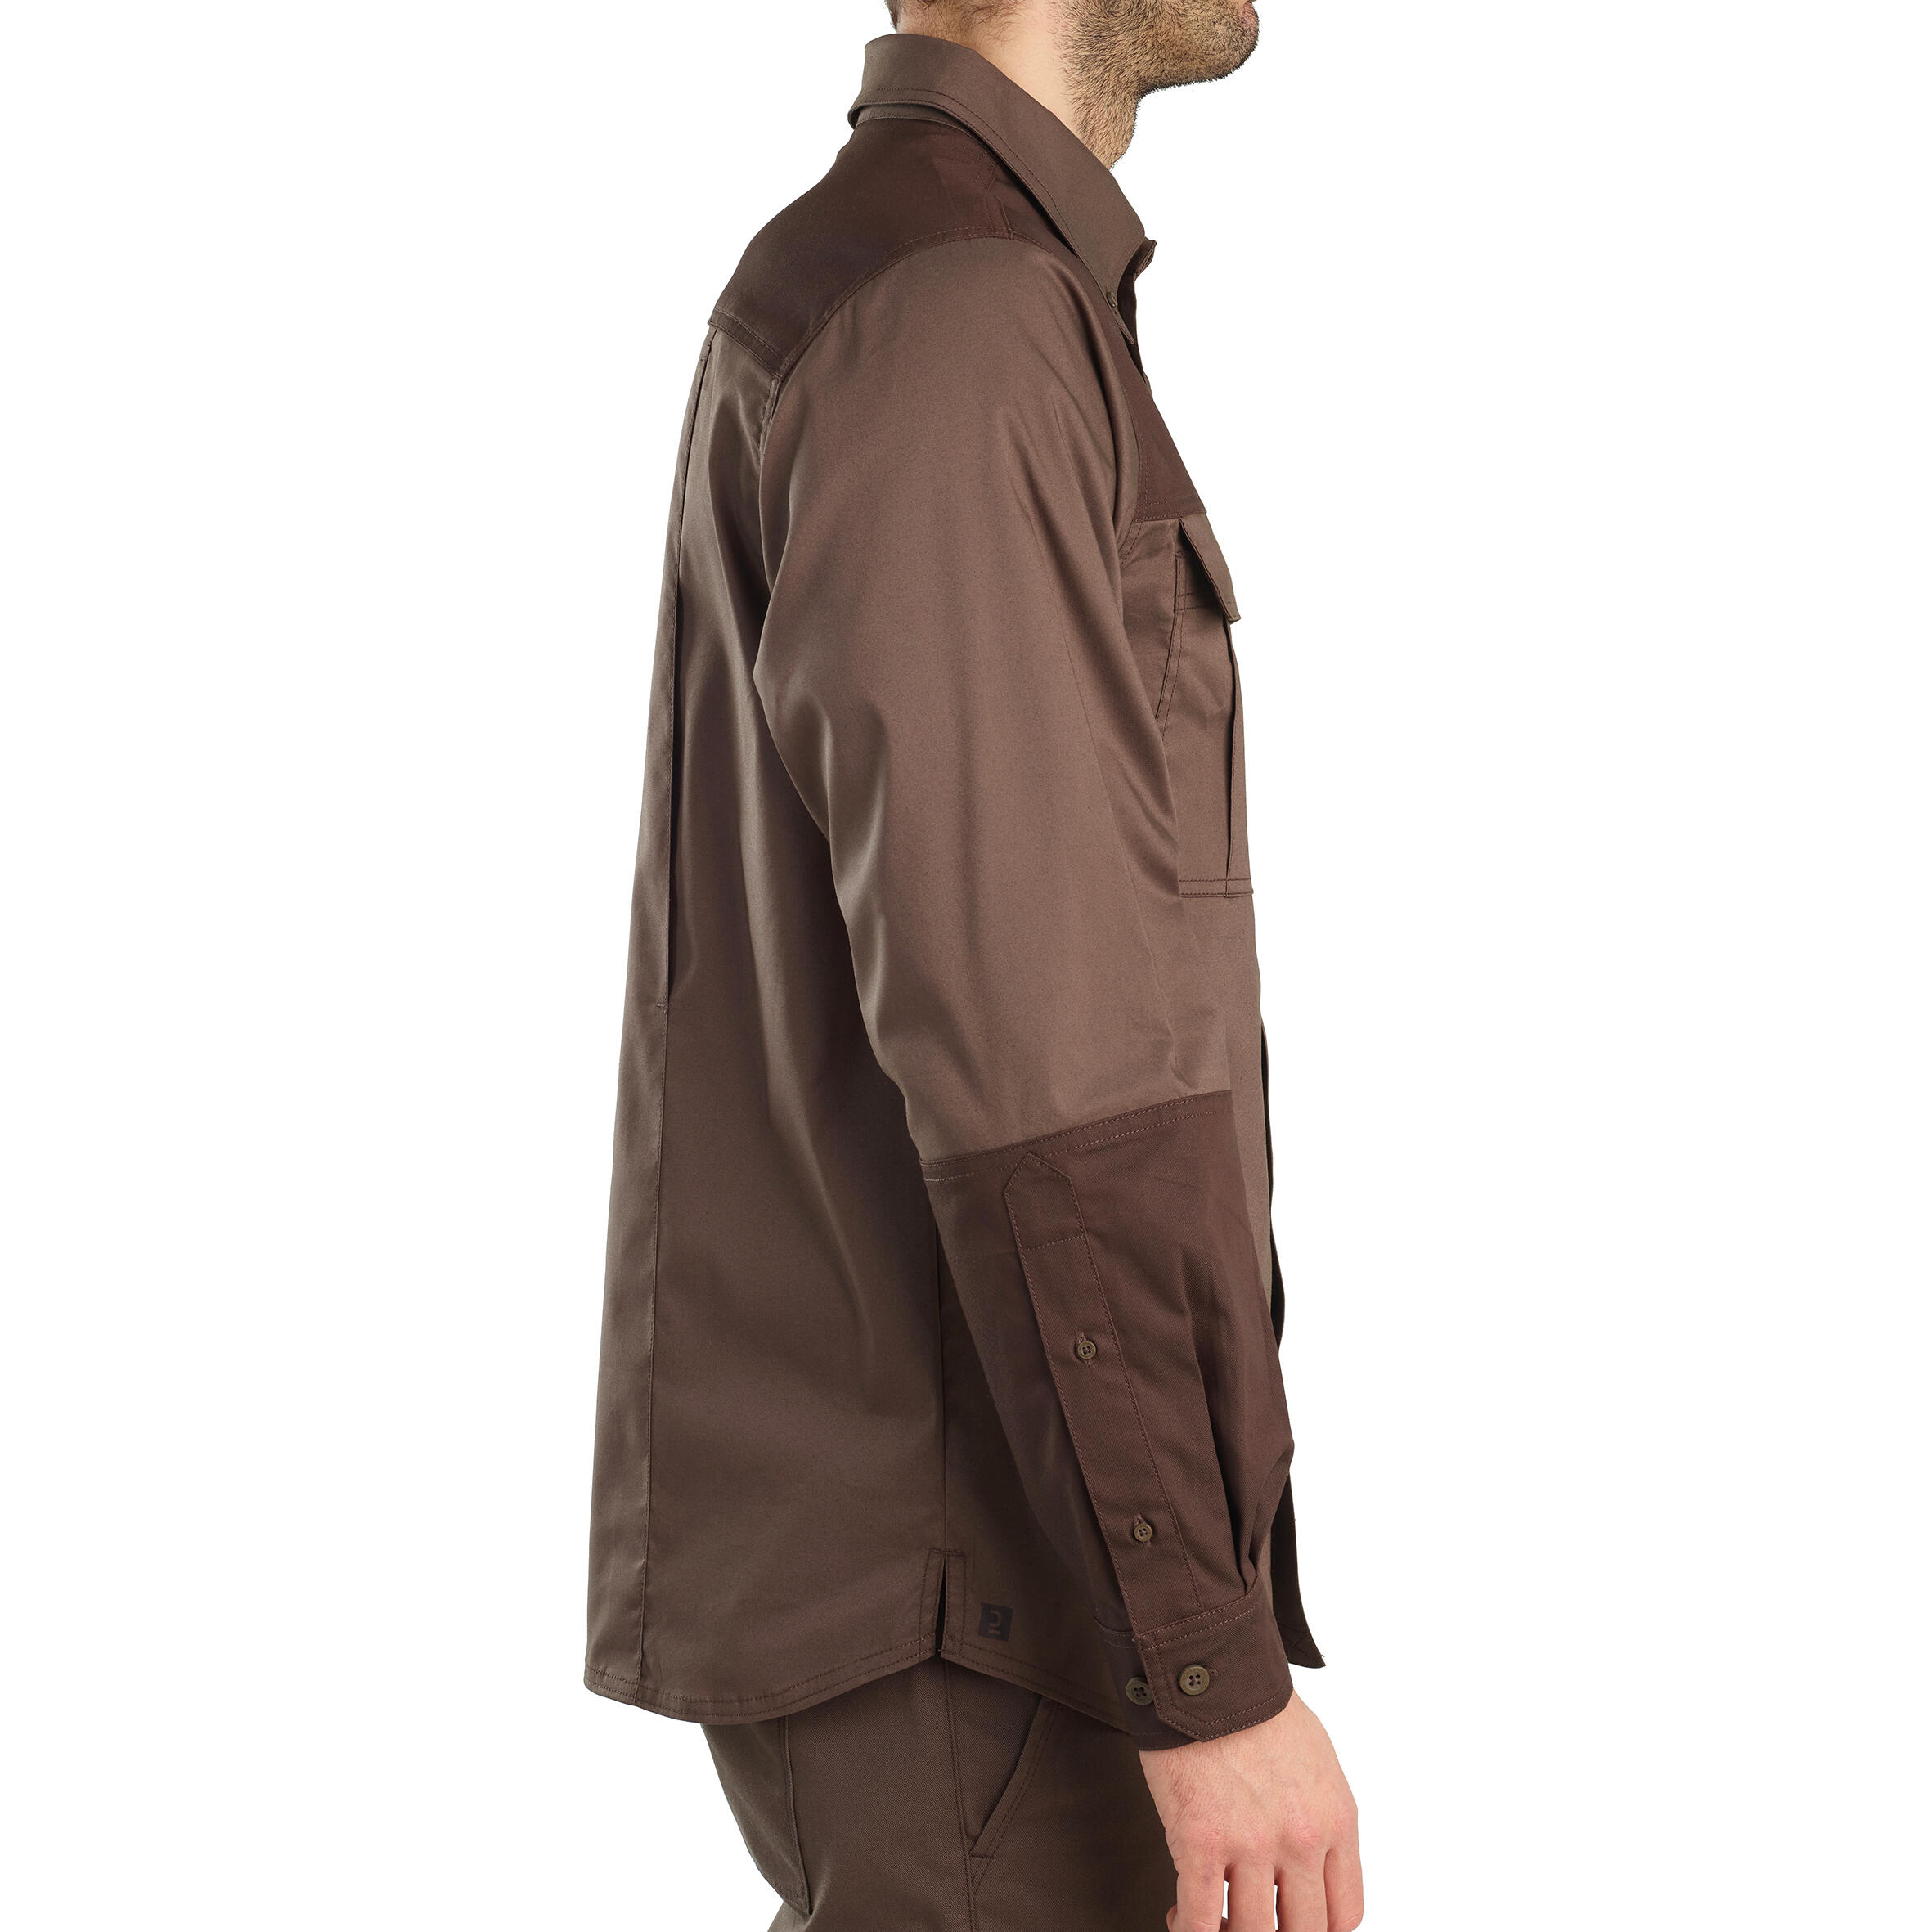 Men's Country Sport Long-Sleeved Comfortable Resistant Cotton Shirt - 500 Brown 4/13